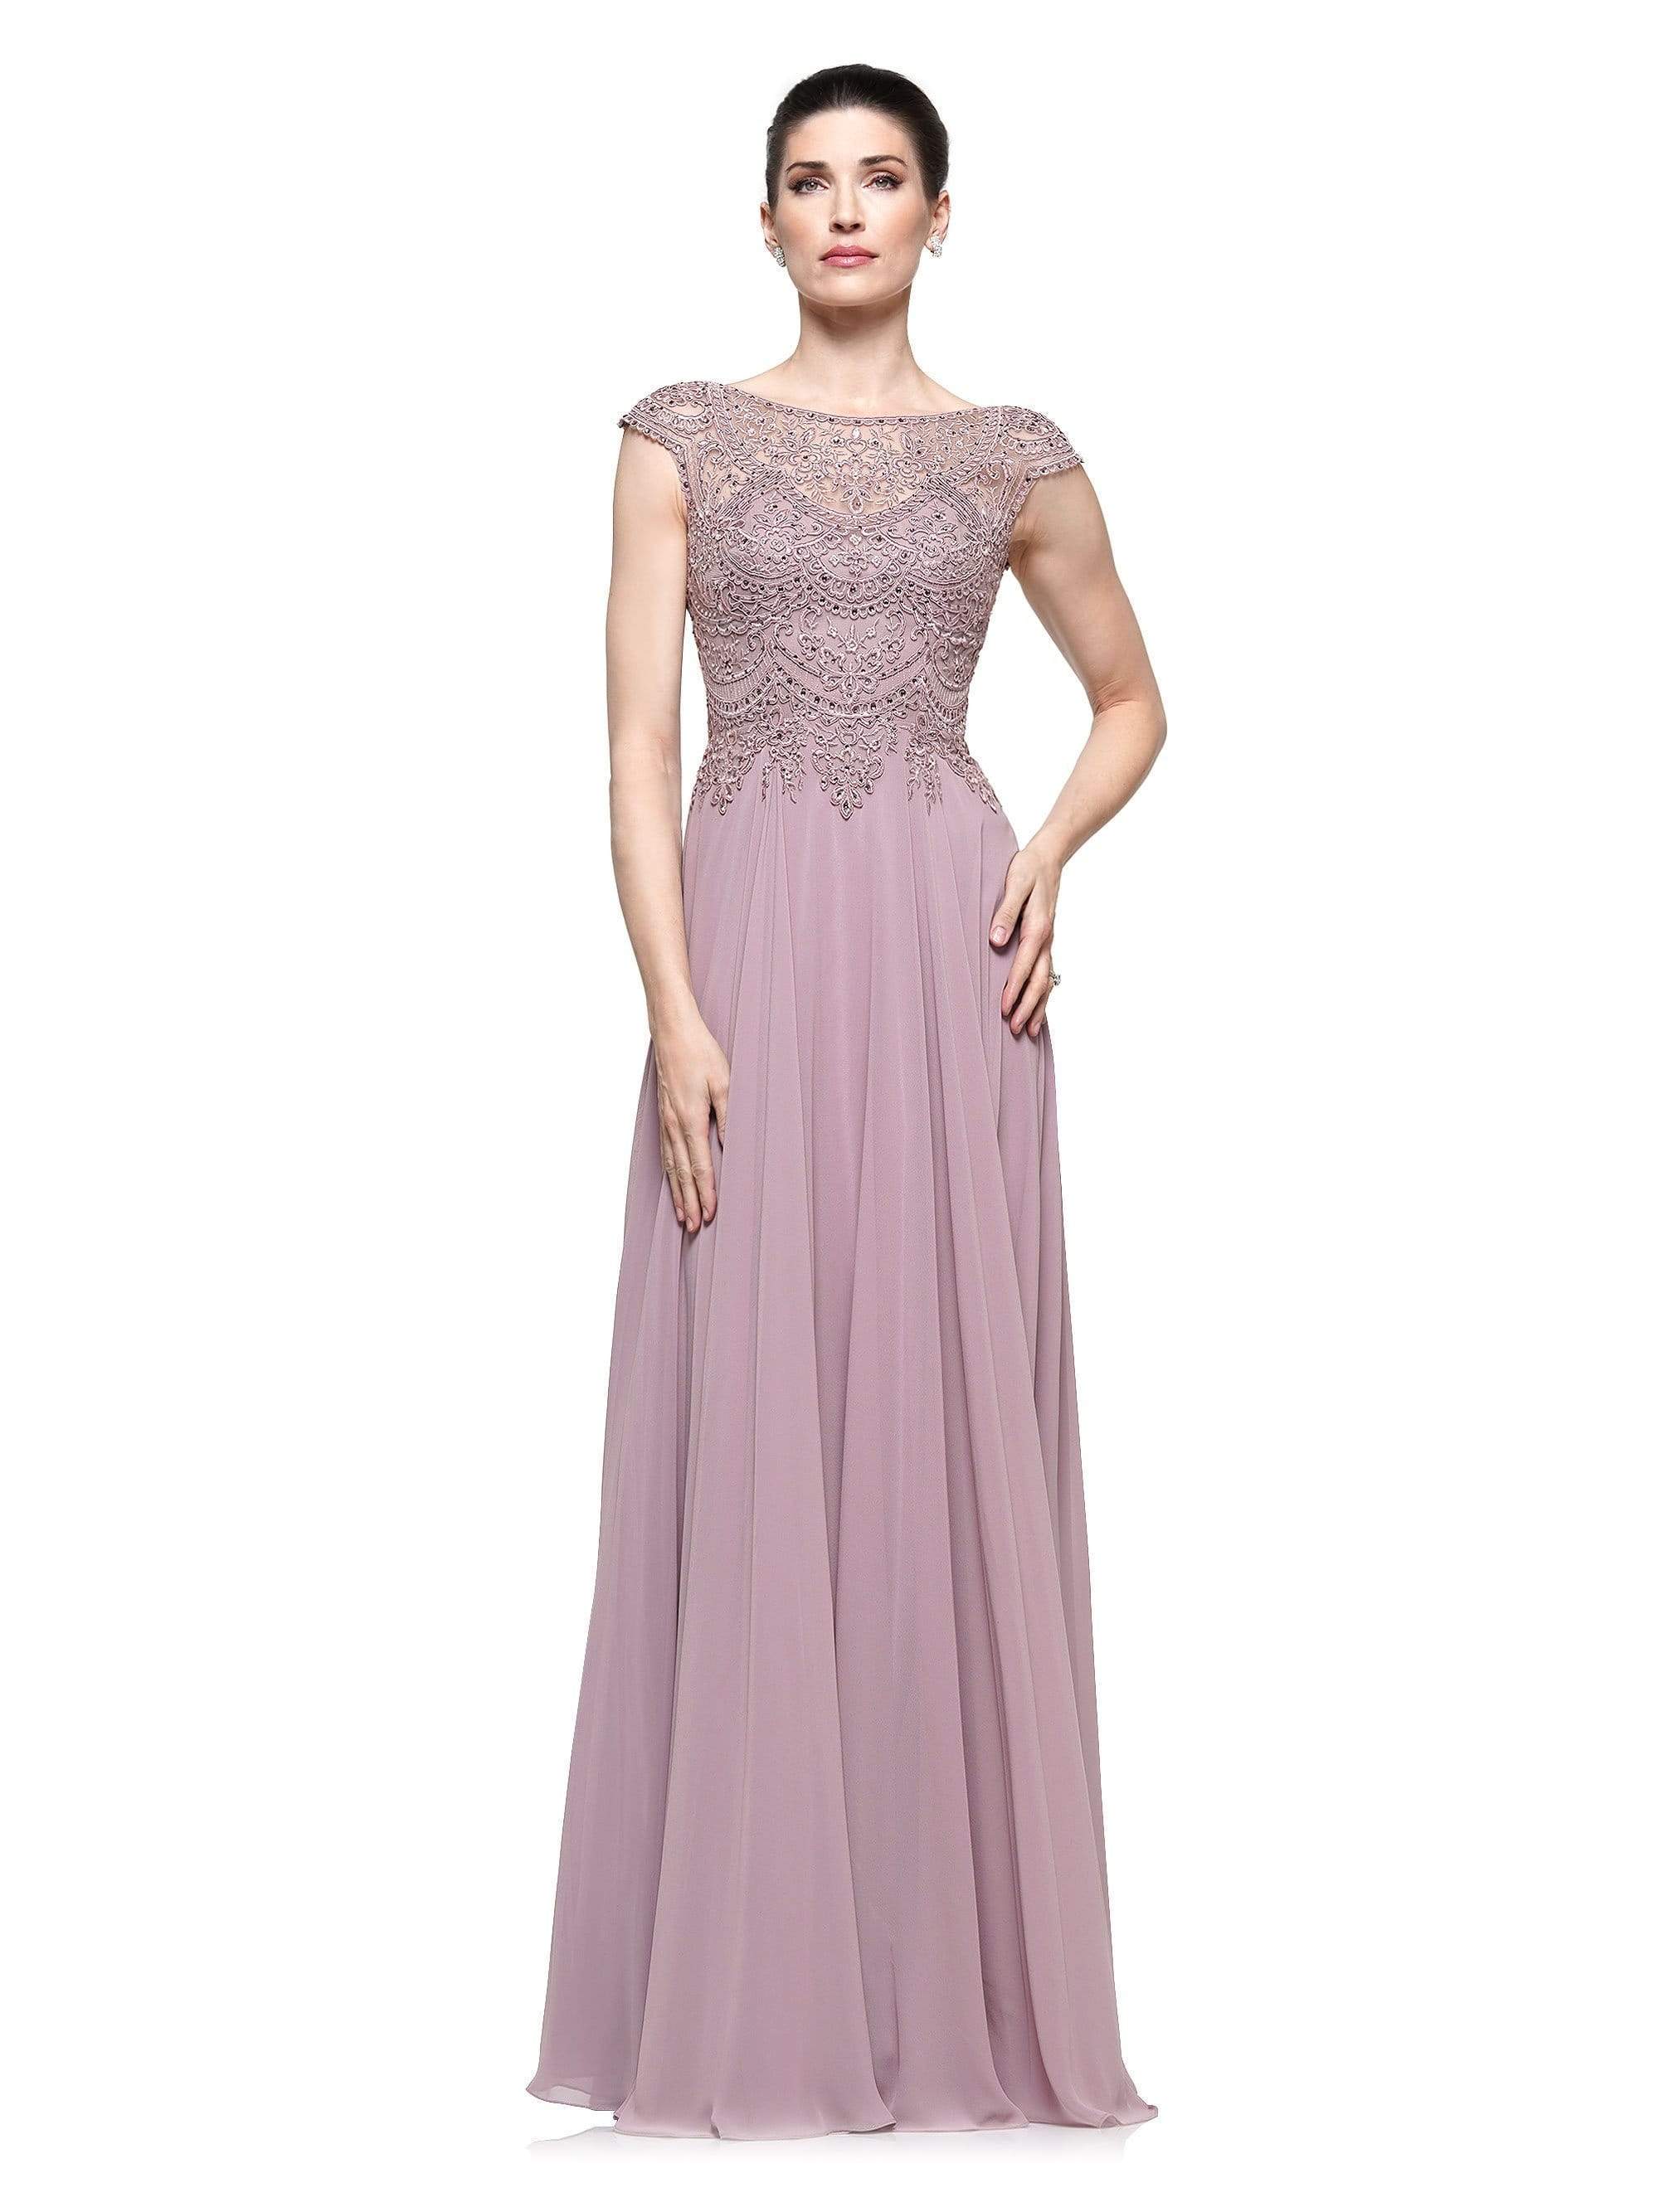 Image of Marsoni by Colors - M238 Beaded Applique A Line Chiffon Dress